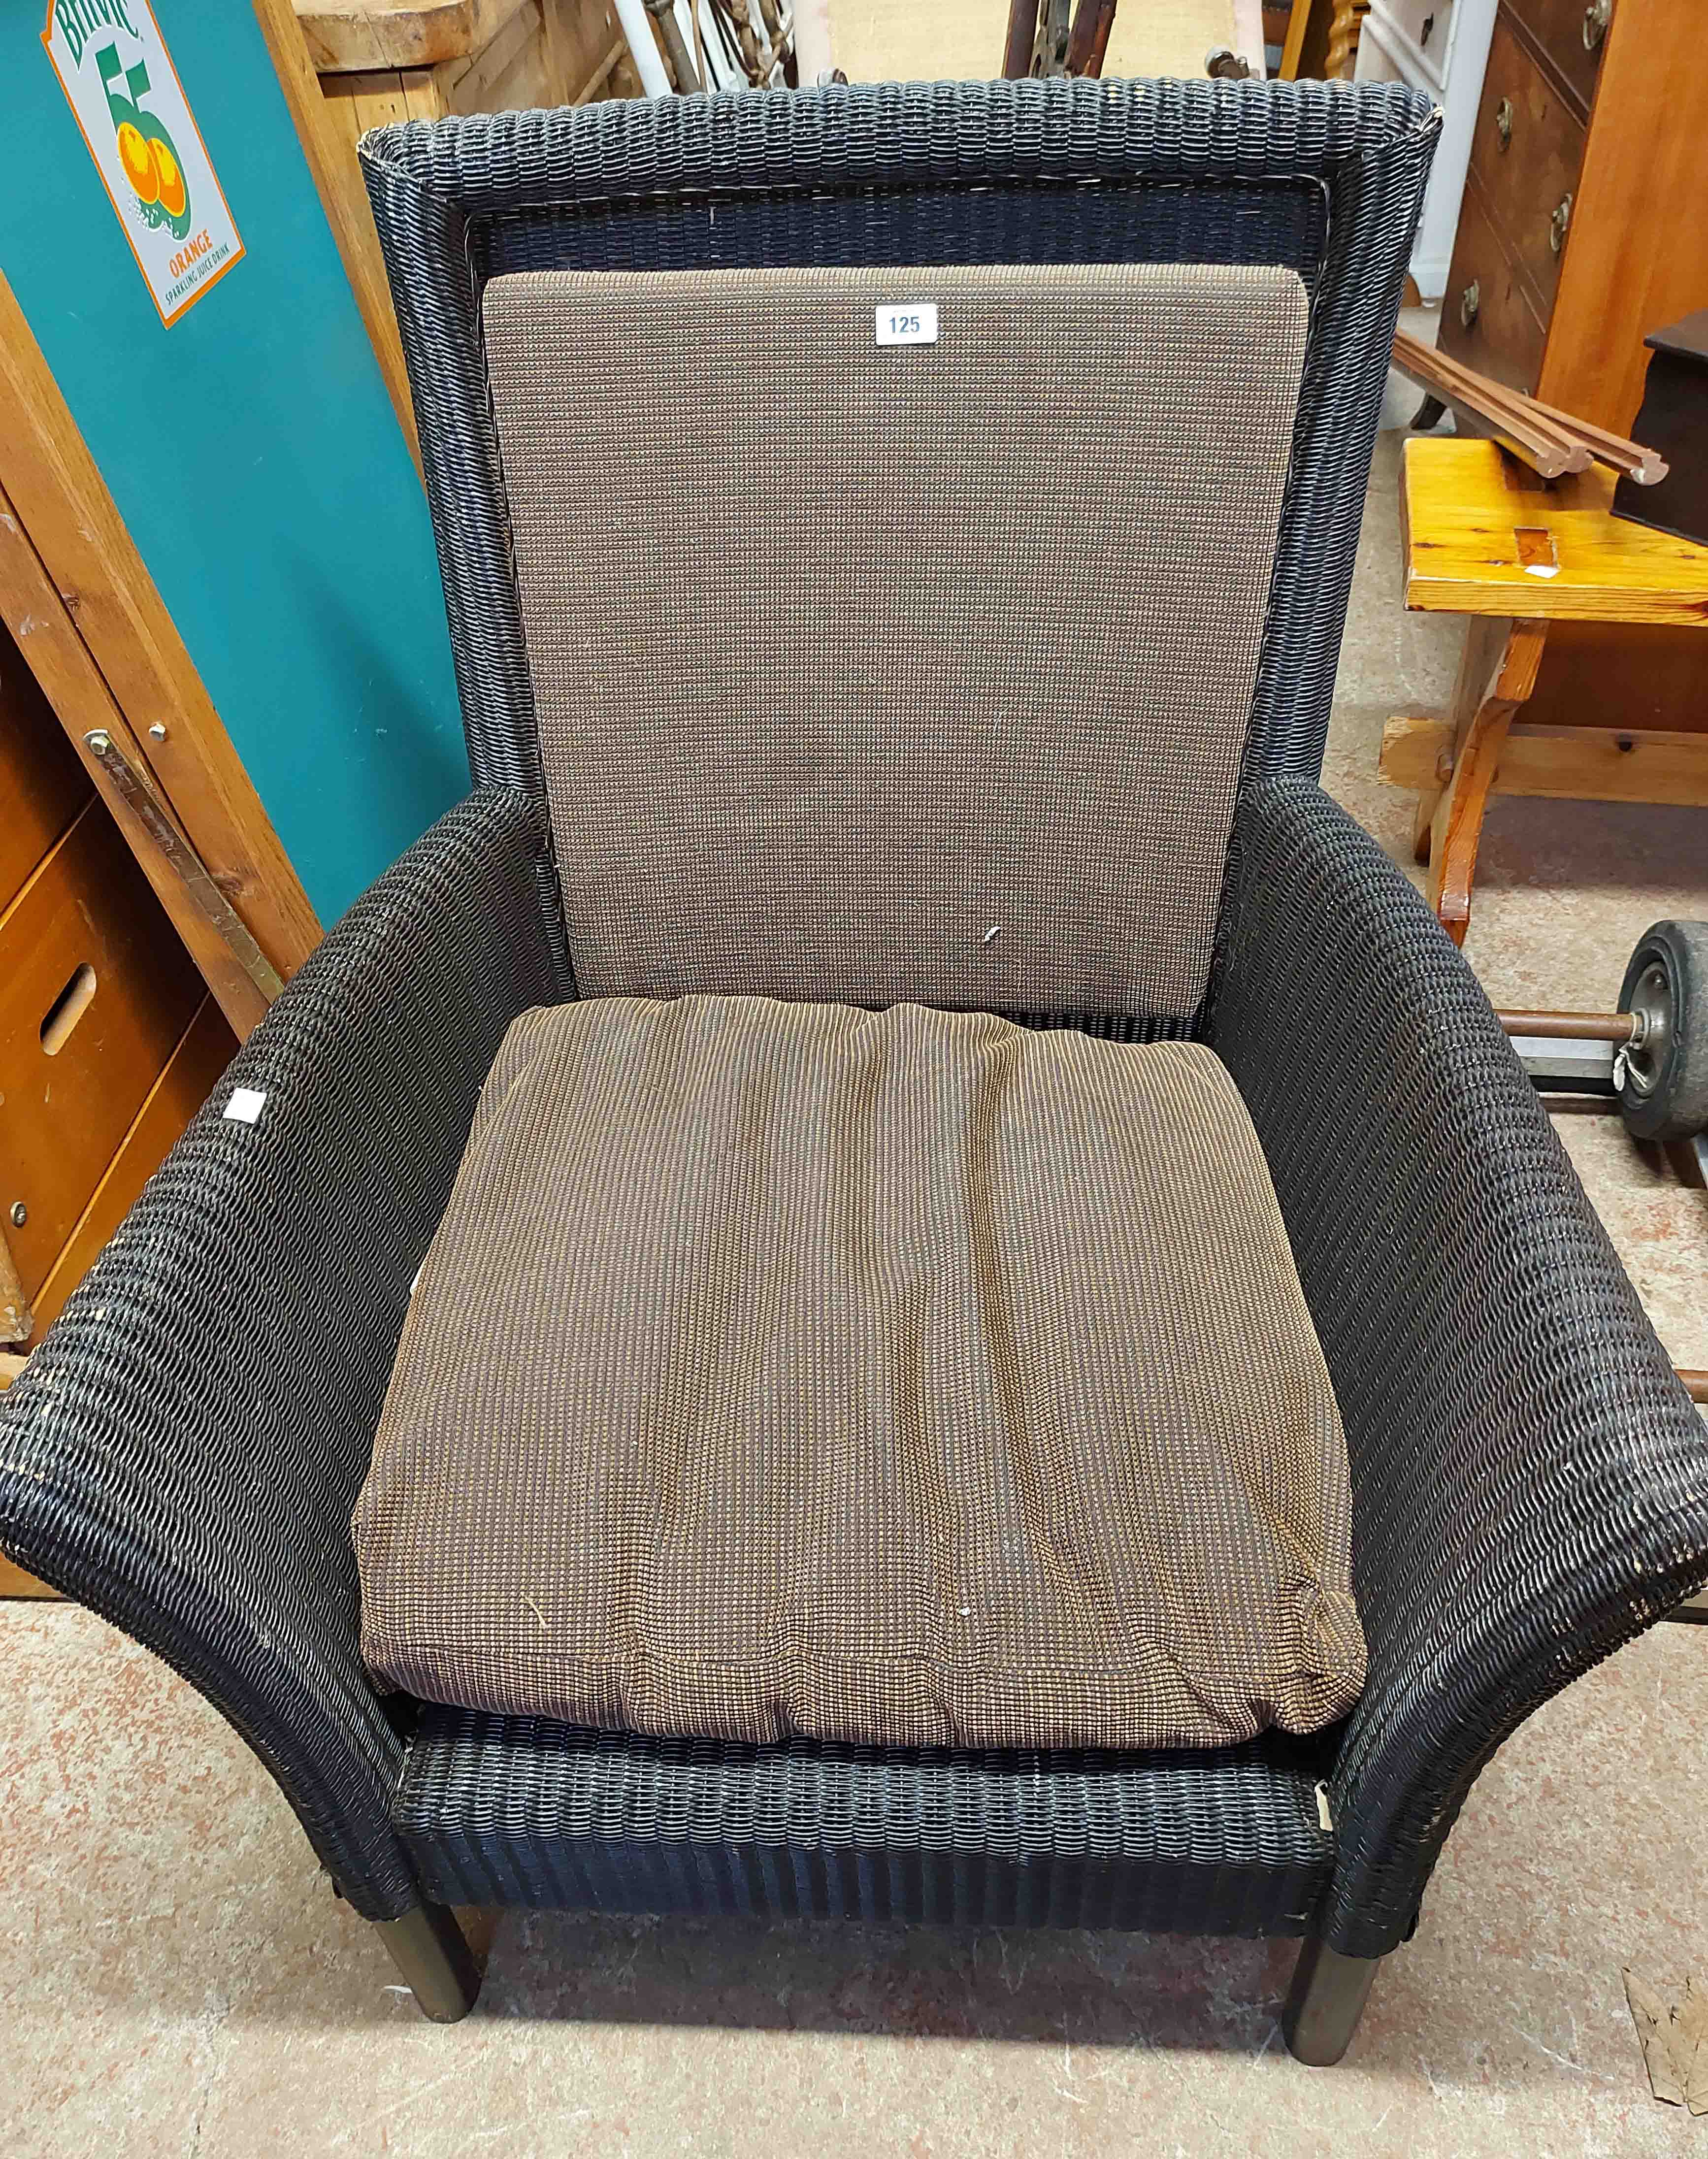 A modern Lloyd Loom armchair with upholstered back rest and cushion